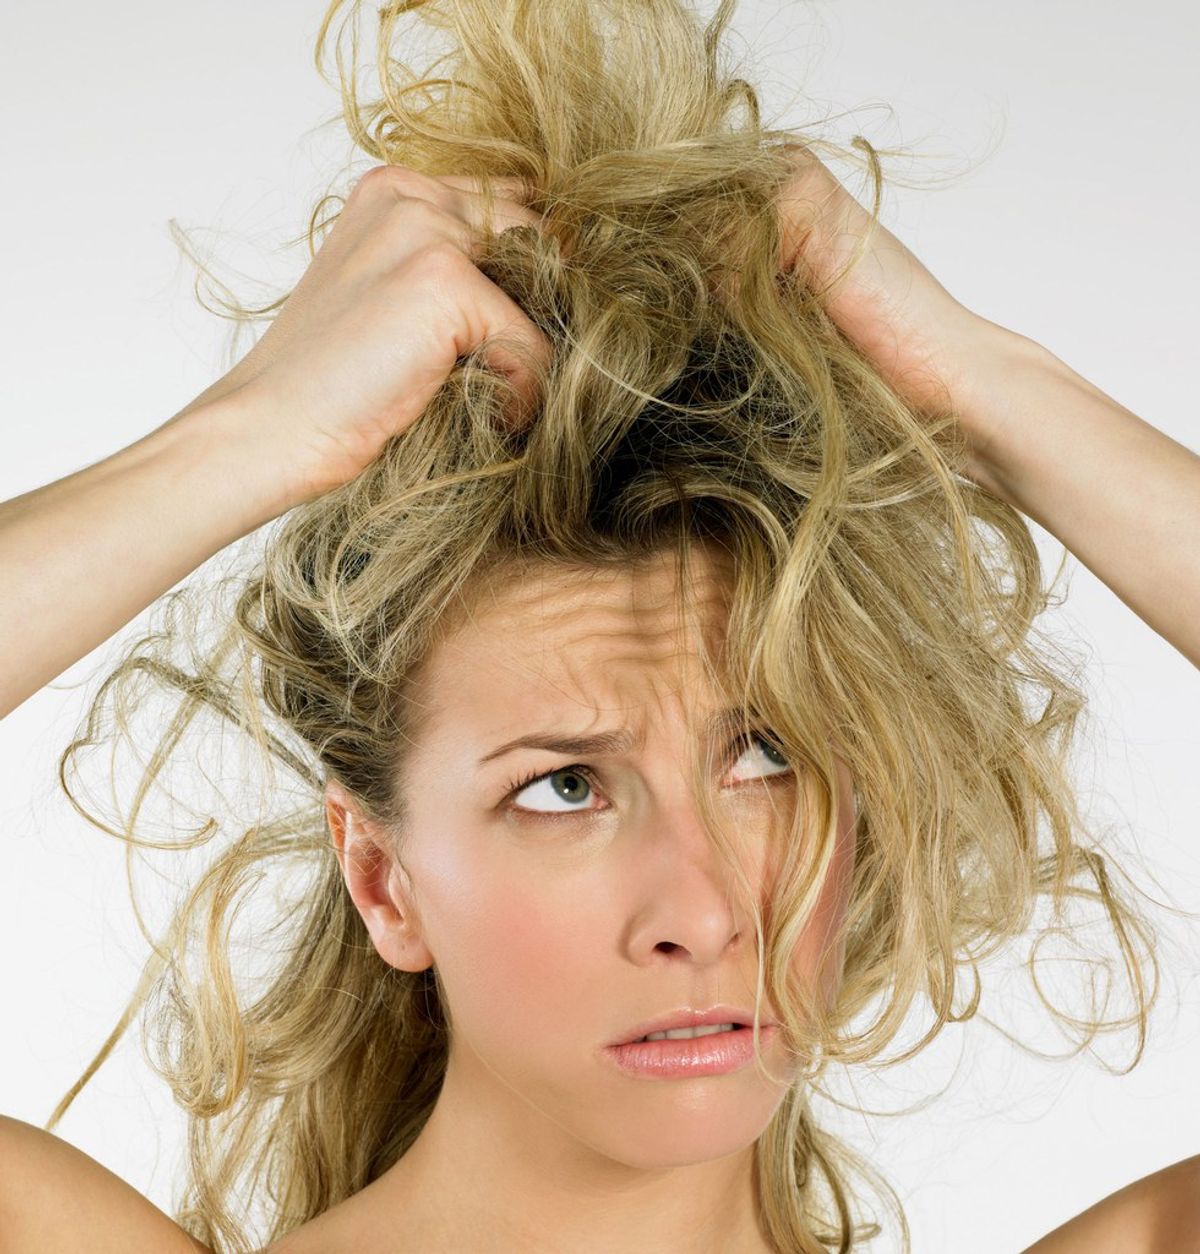 10 Things You'll Understand If You Have A Love/Hate Relationship With Your Hair